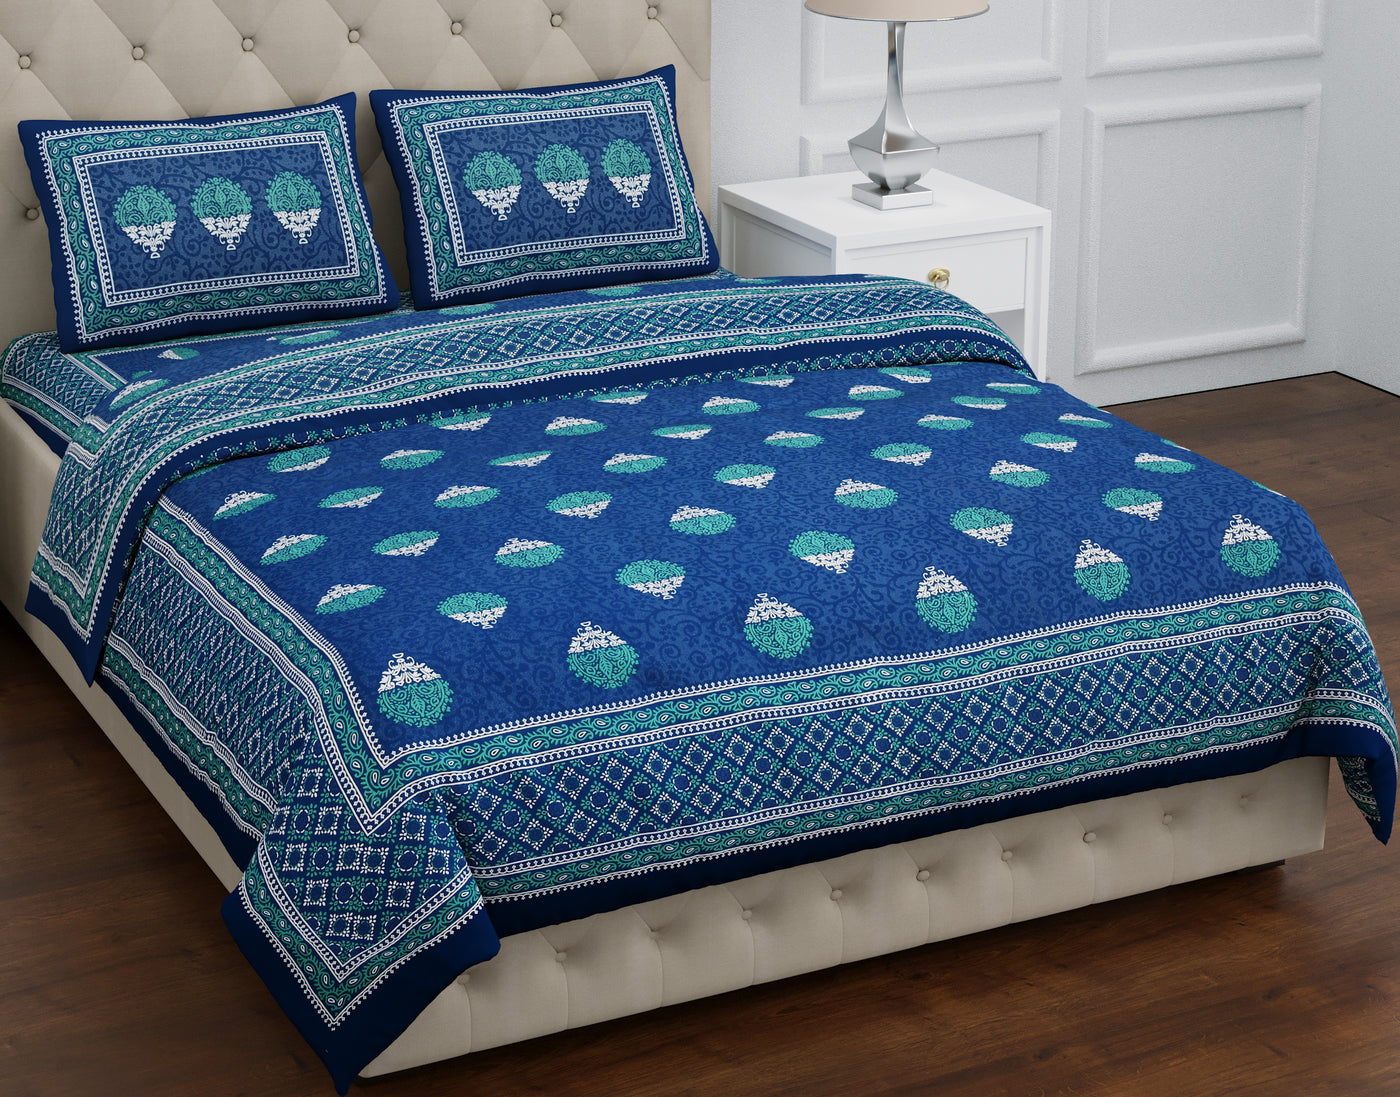 Pure Cotton Blue Color King Size Bedsheet For Double Bed By Braise